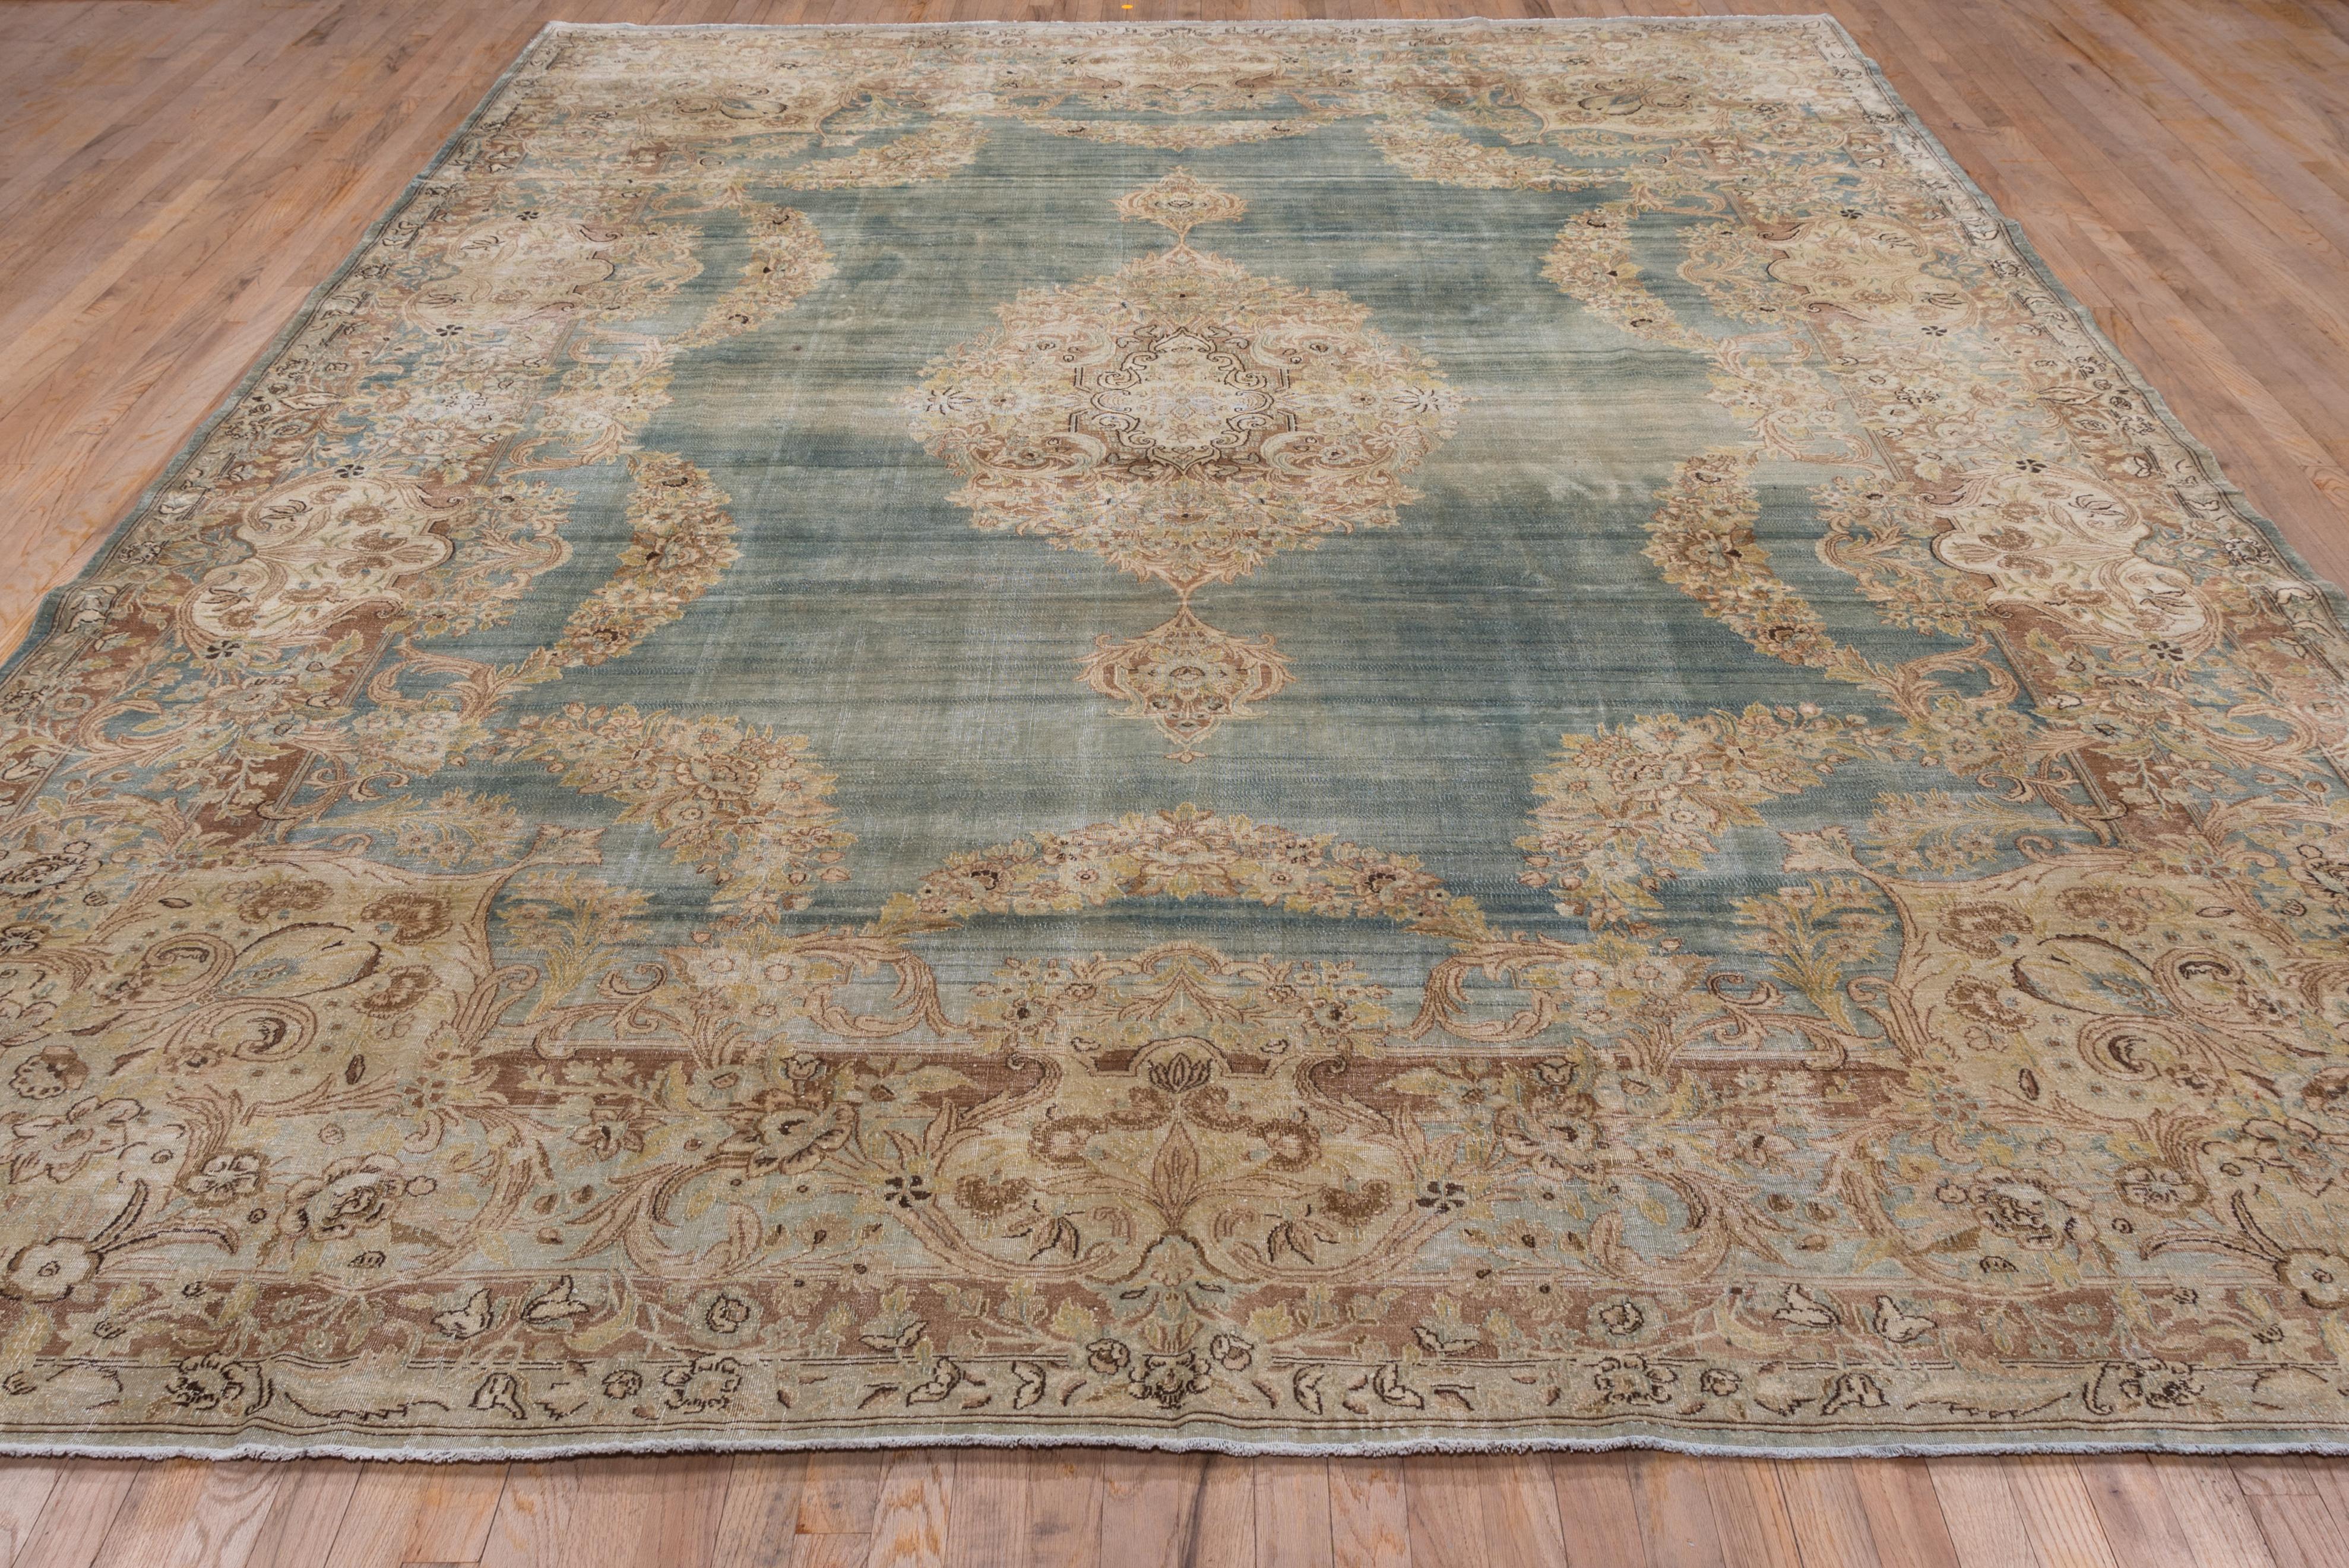 Antique Turkish Sivas Carpet, Blue Green Field, Formal Palette In Good Condition For Sale In New York, NY